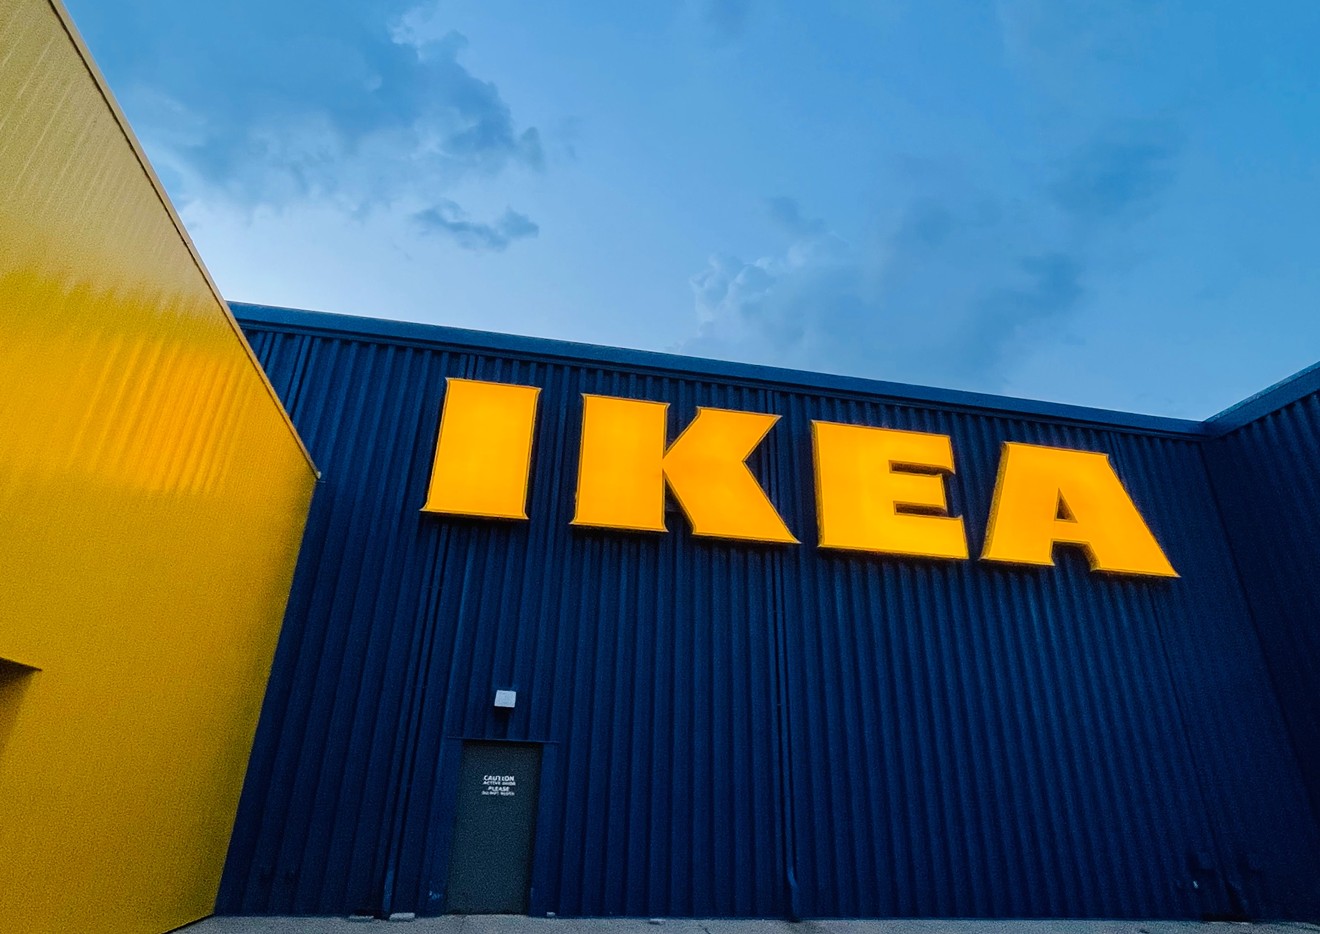 Earlier this year, the Swedish home and furniture company announced plans to invest more than $2.2 billion in U.S. expansion.